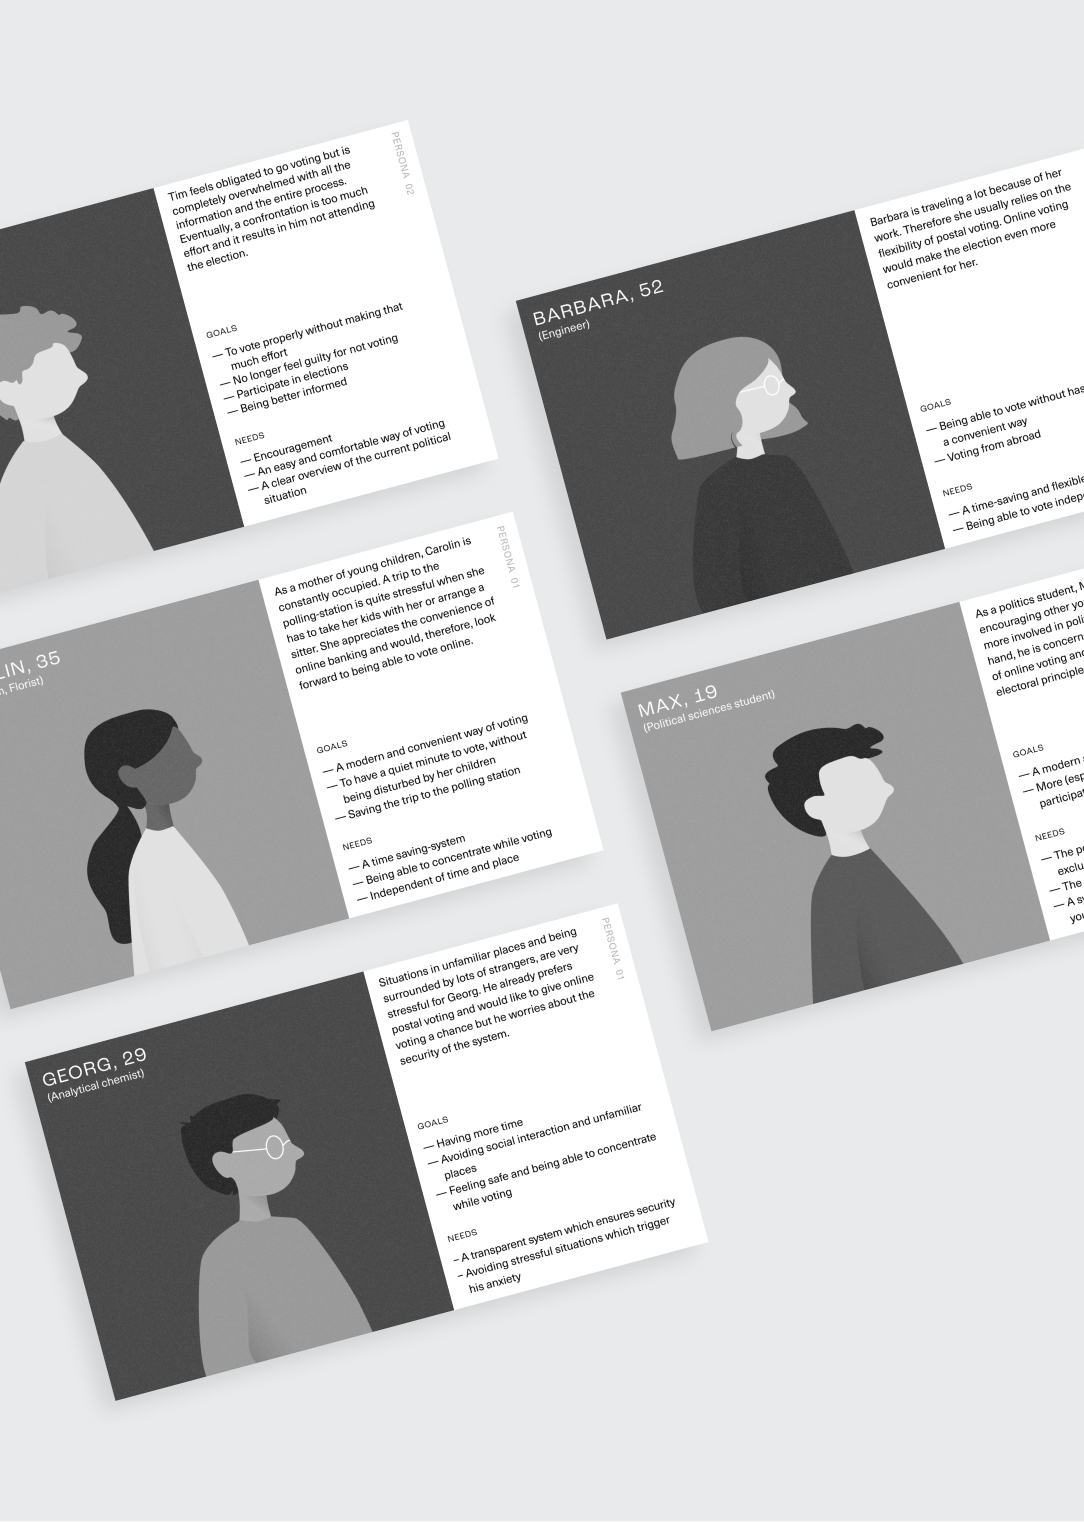 cards showing personas with illustration and text